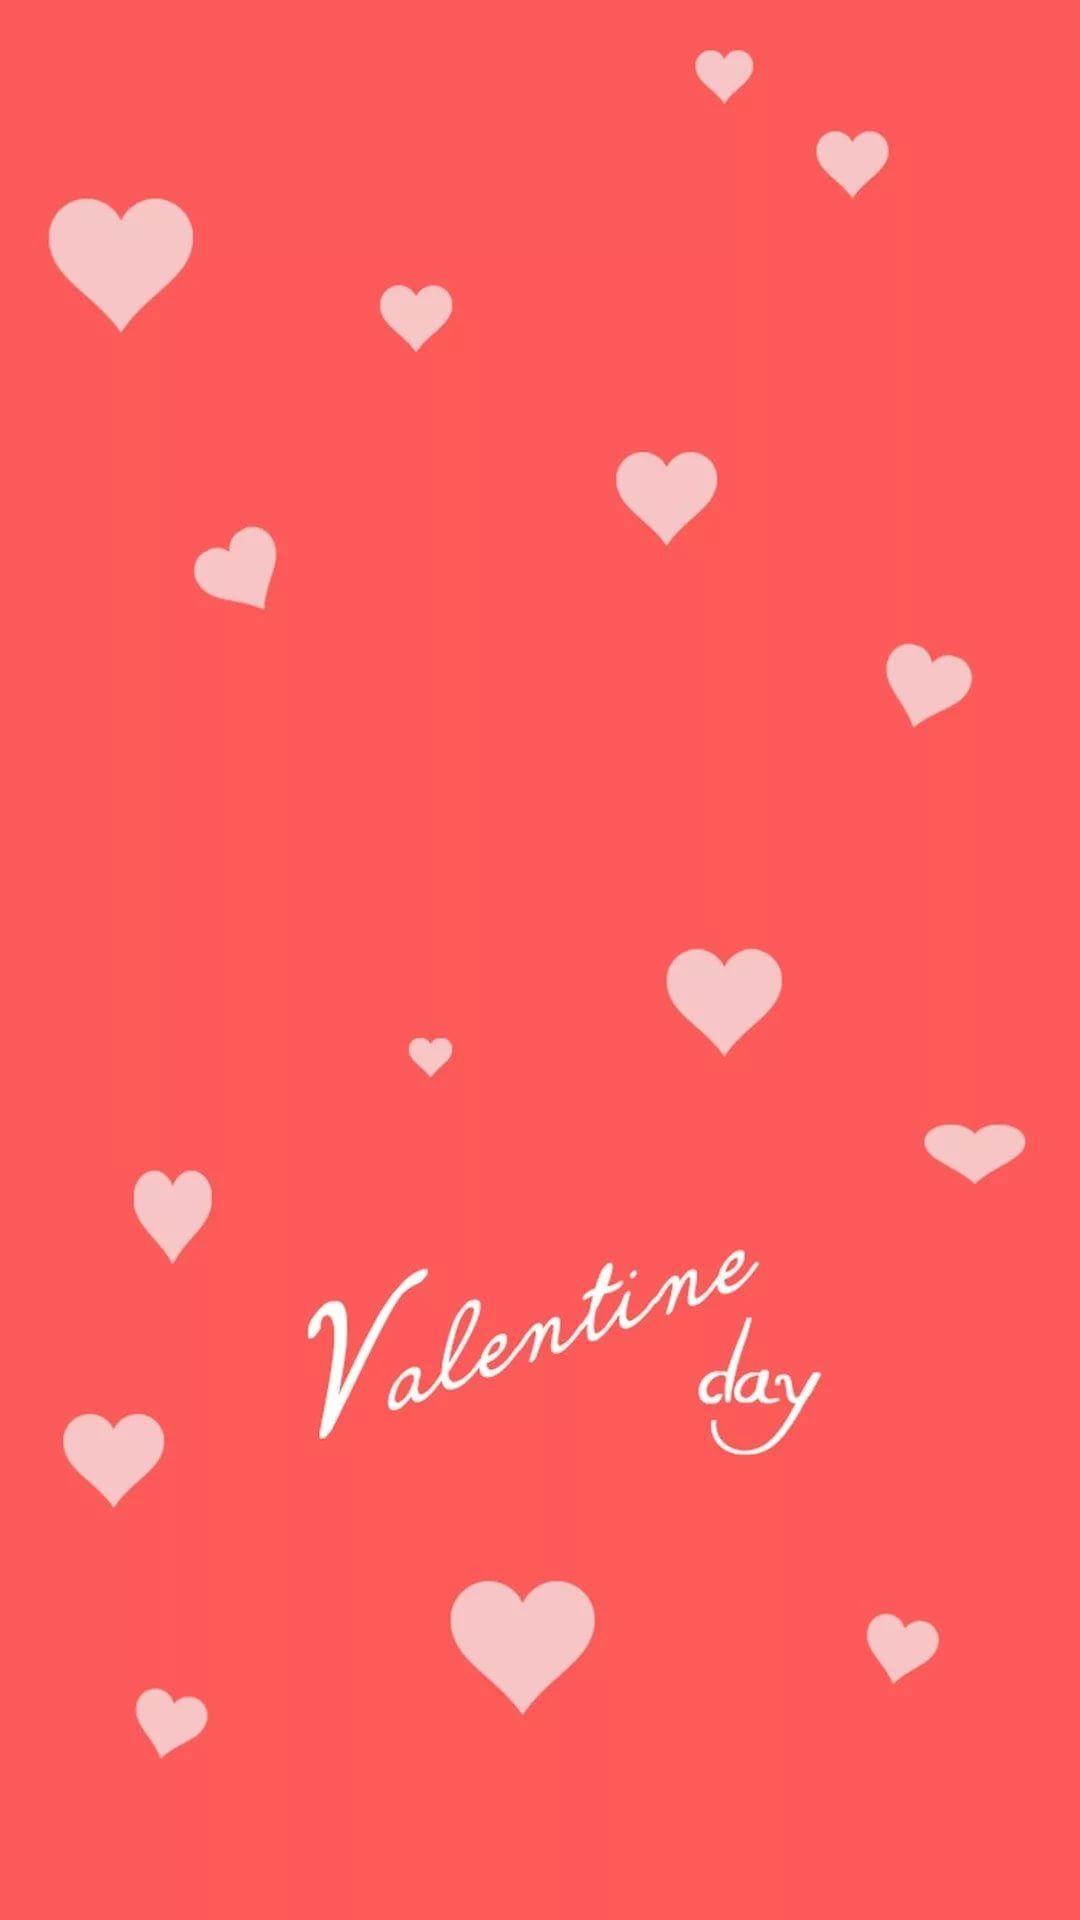 17 Cute Valentines Day Wallpapers For Your iPhone Android  Google Phone